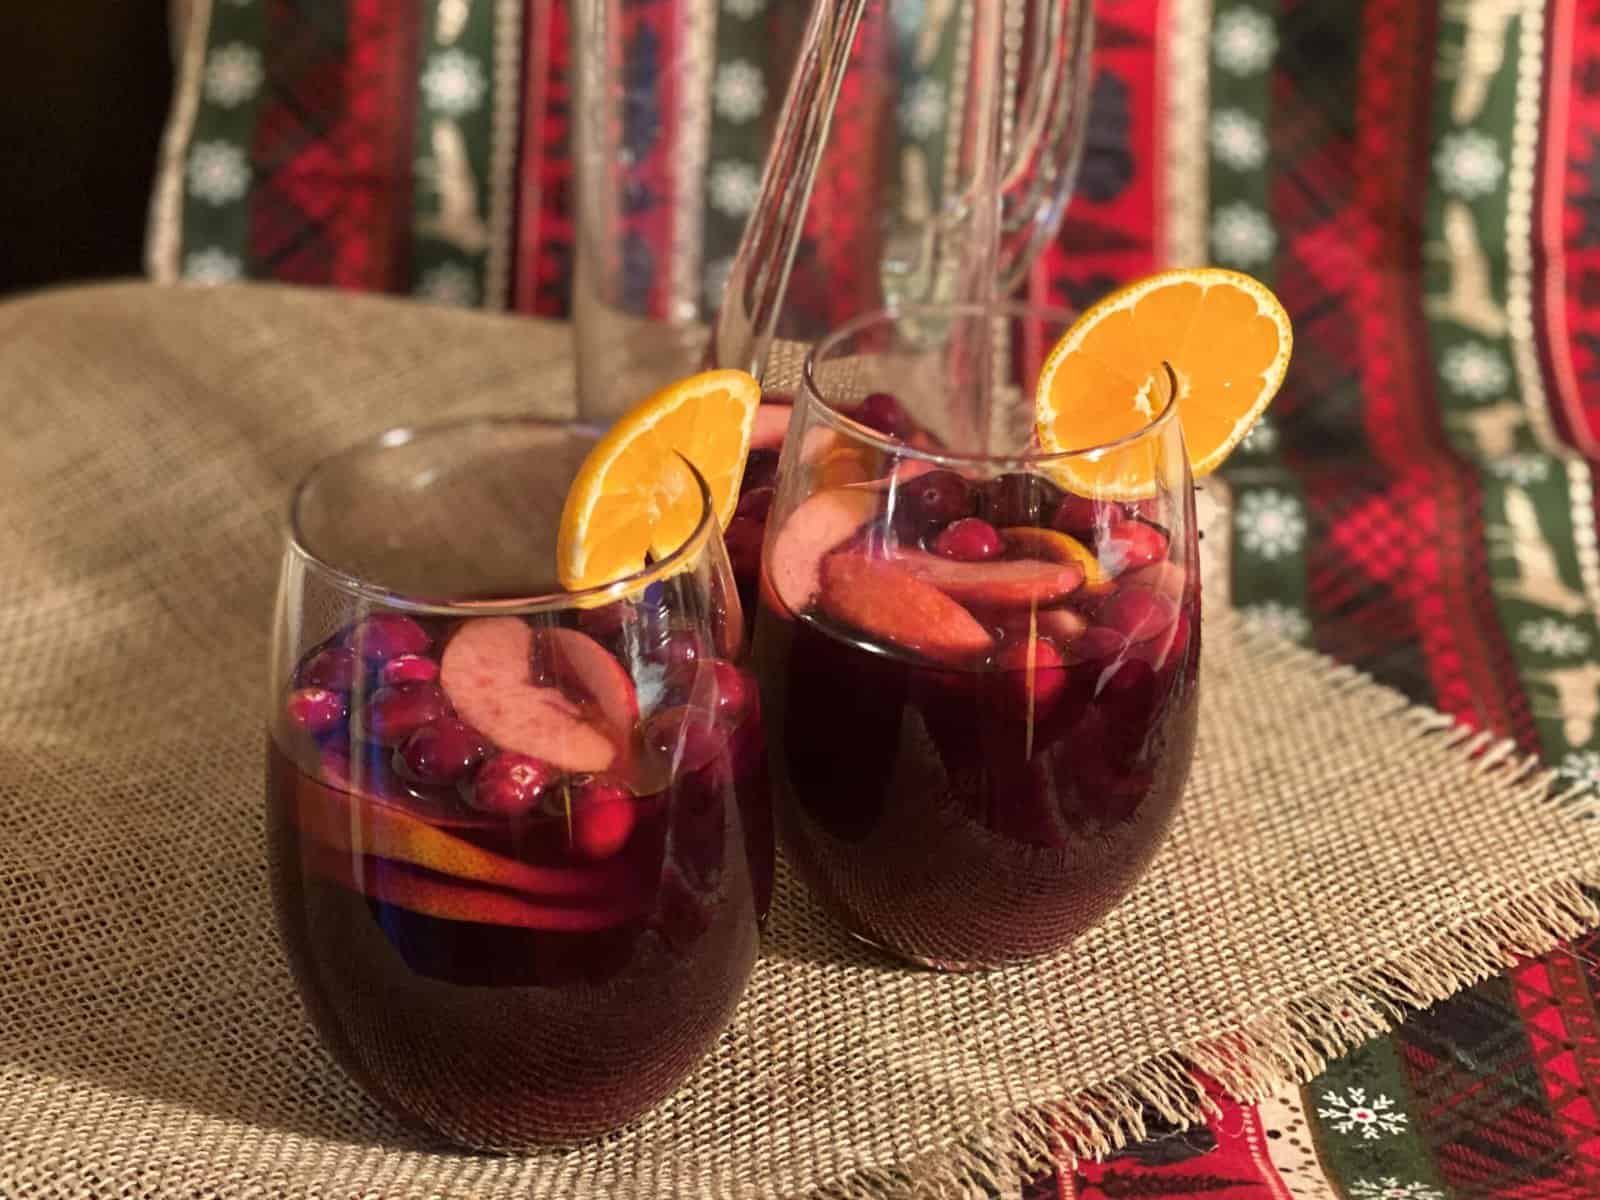  Sip on the festive flavors of the season with our Jolly Cranberry Juice Sangria!